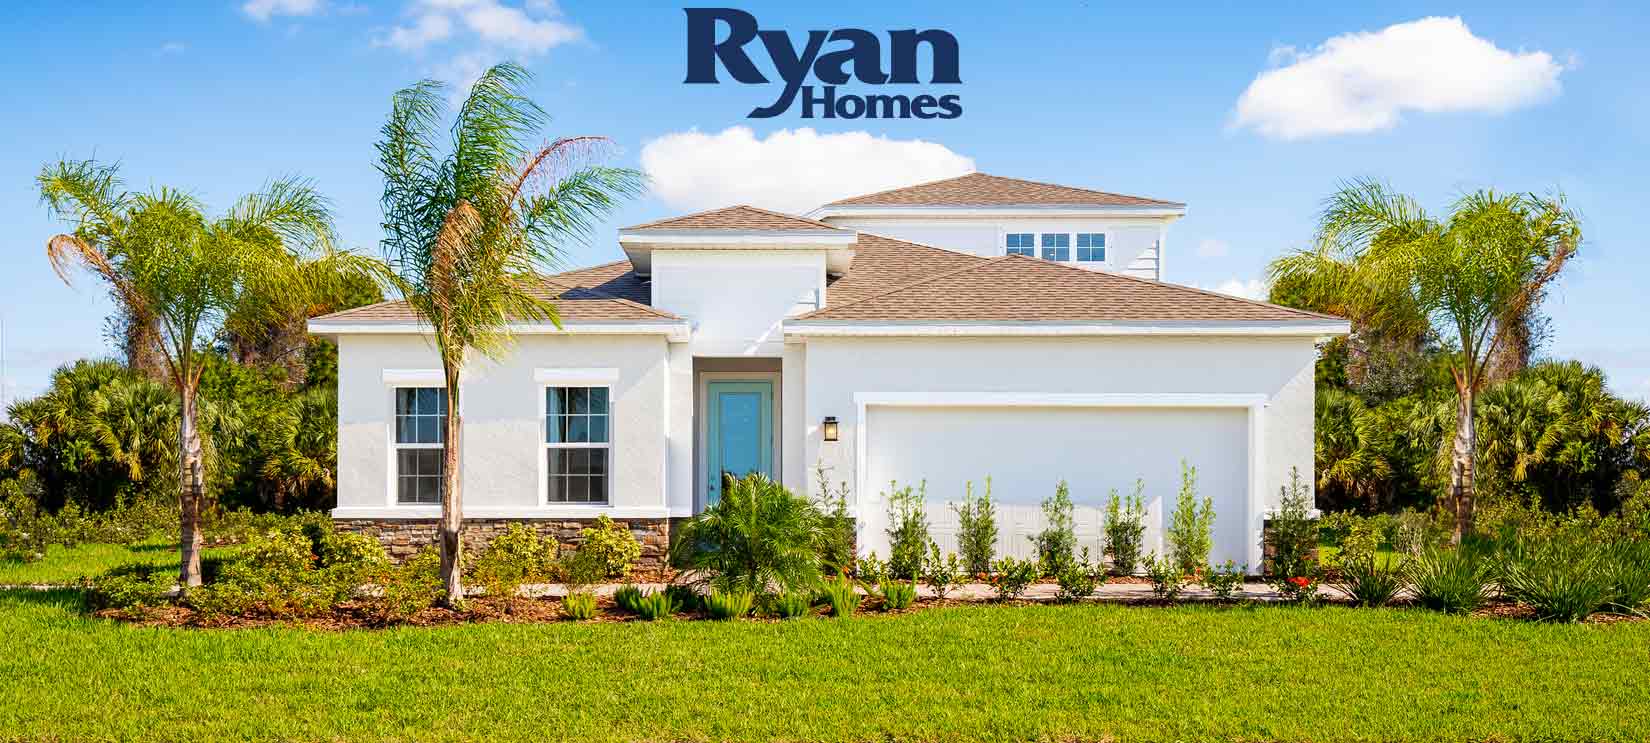 Ryan Homes Panama Model Home Coming Soon at West Port in Port Charlotte